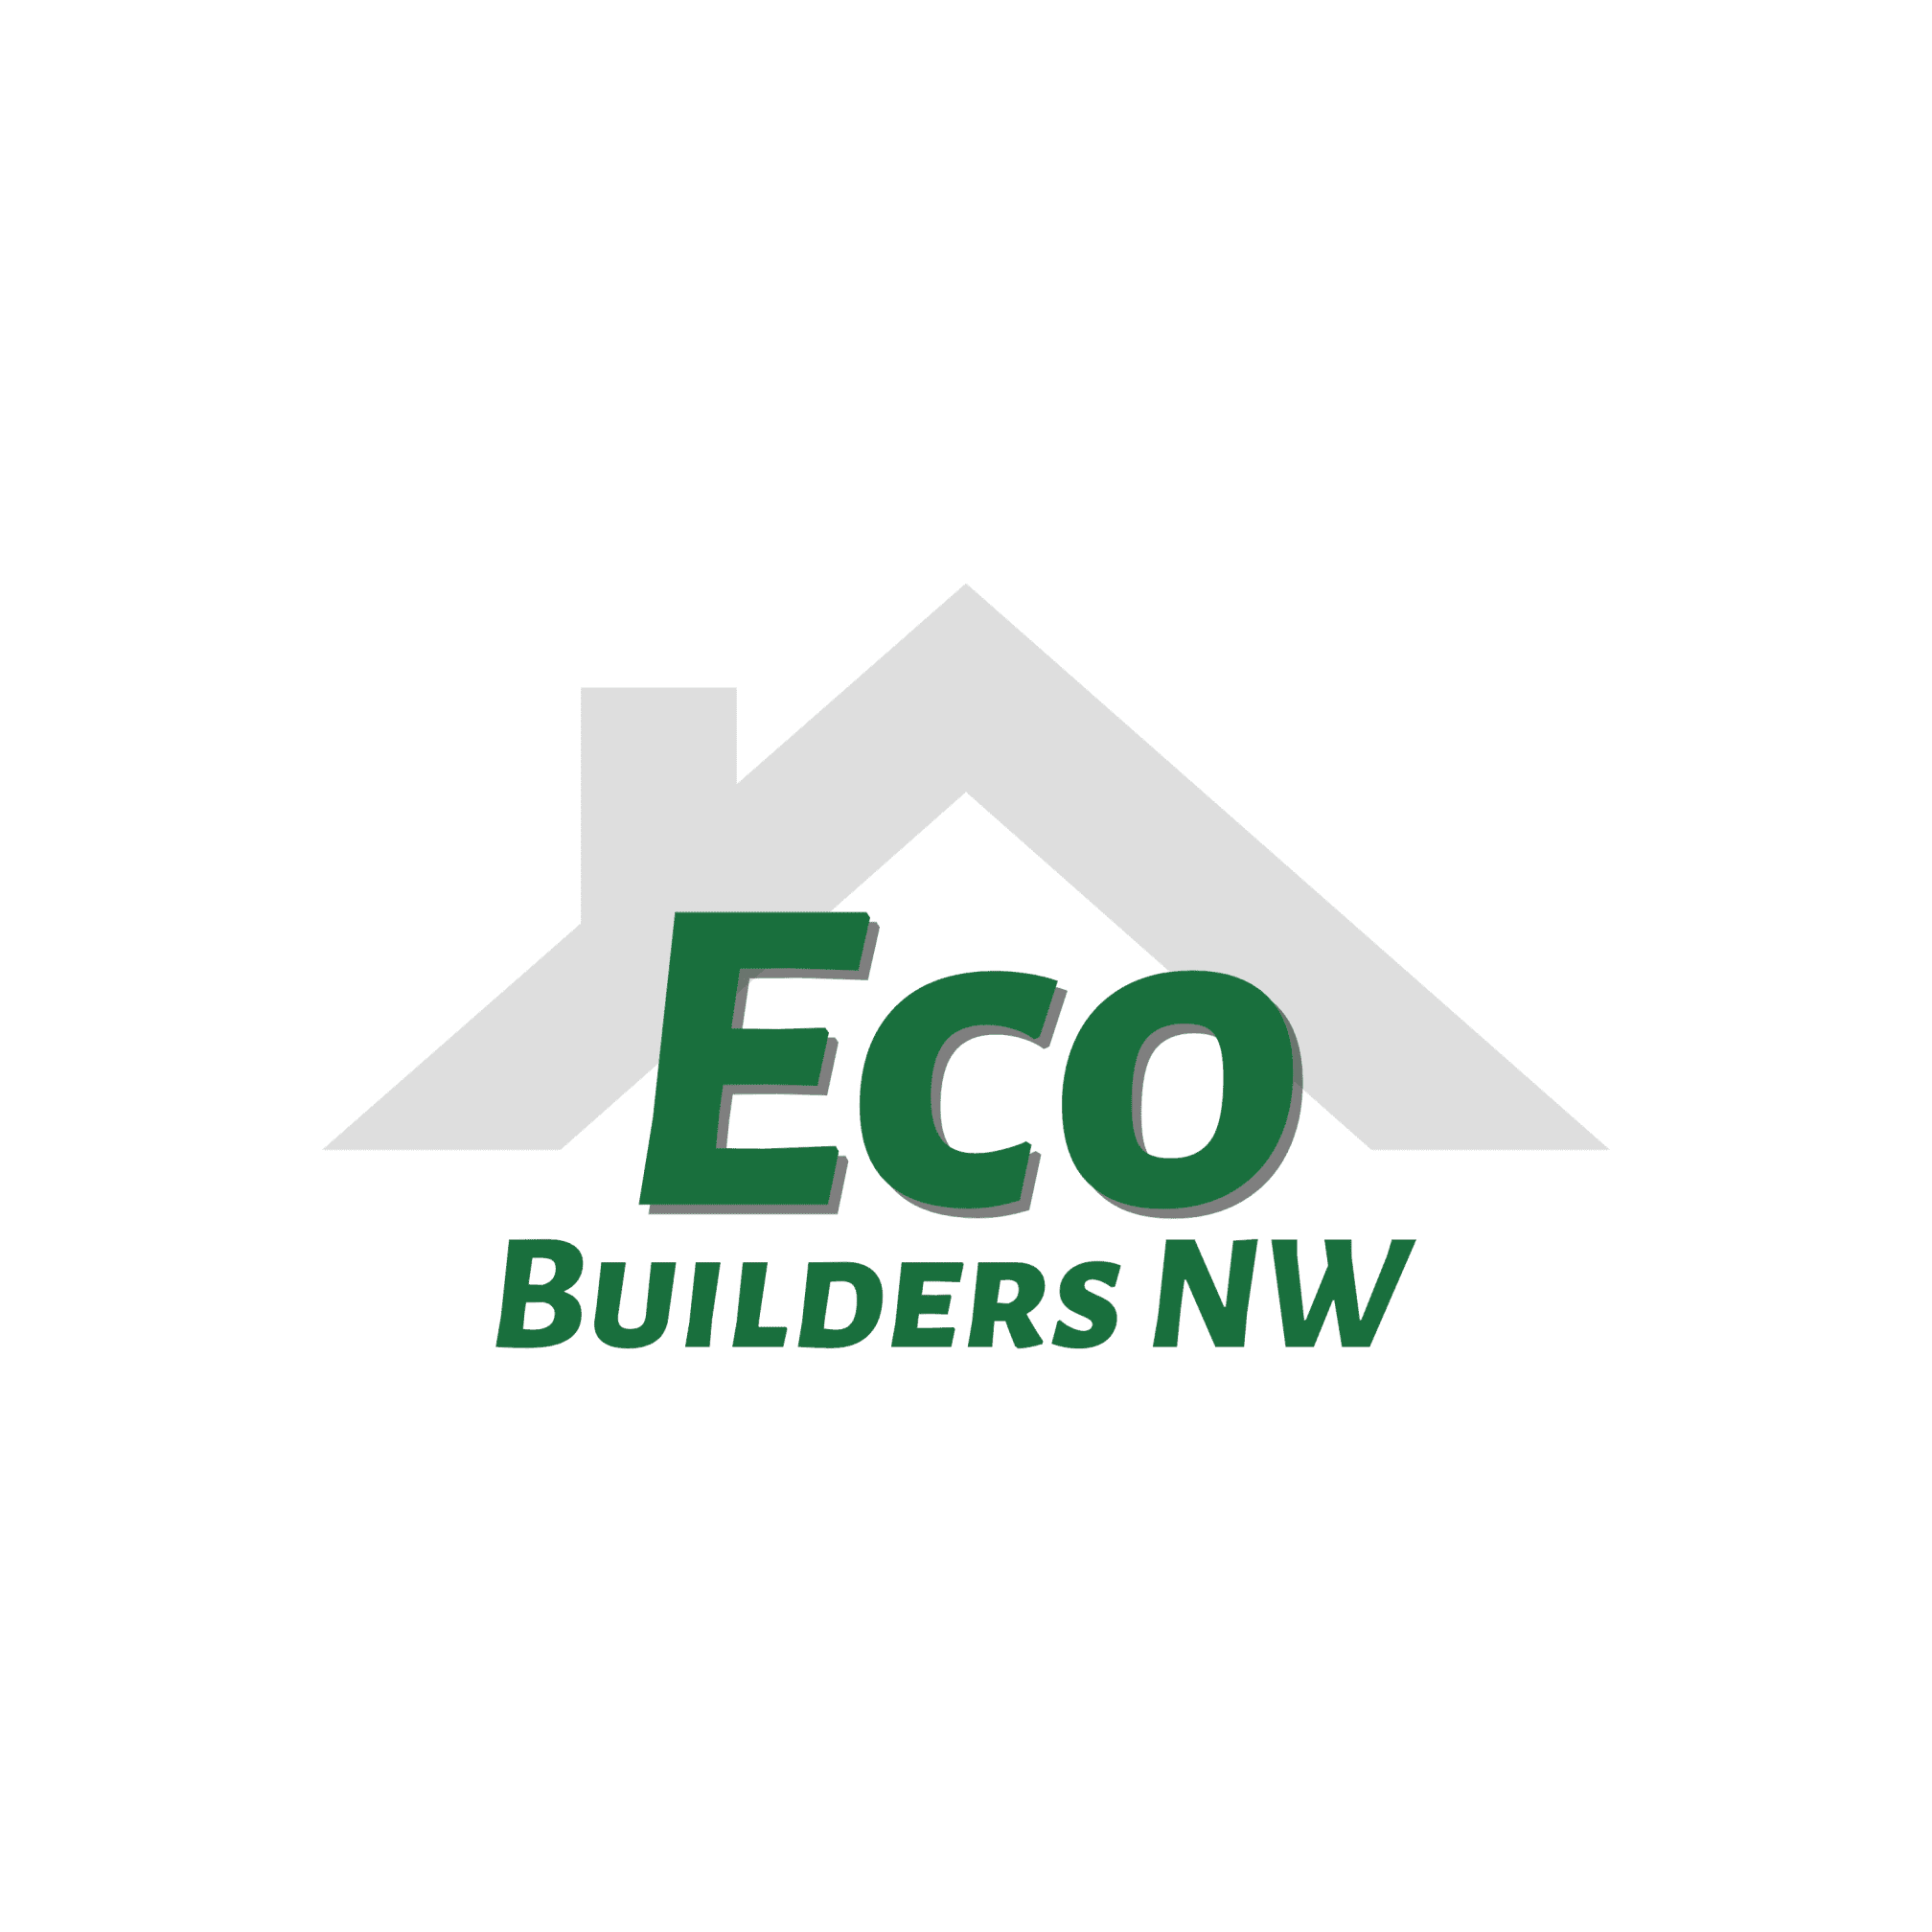 Images Eco Builders NW Ltd